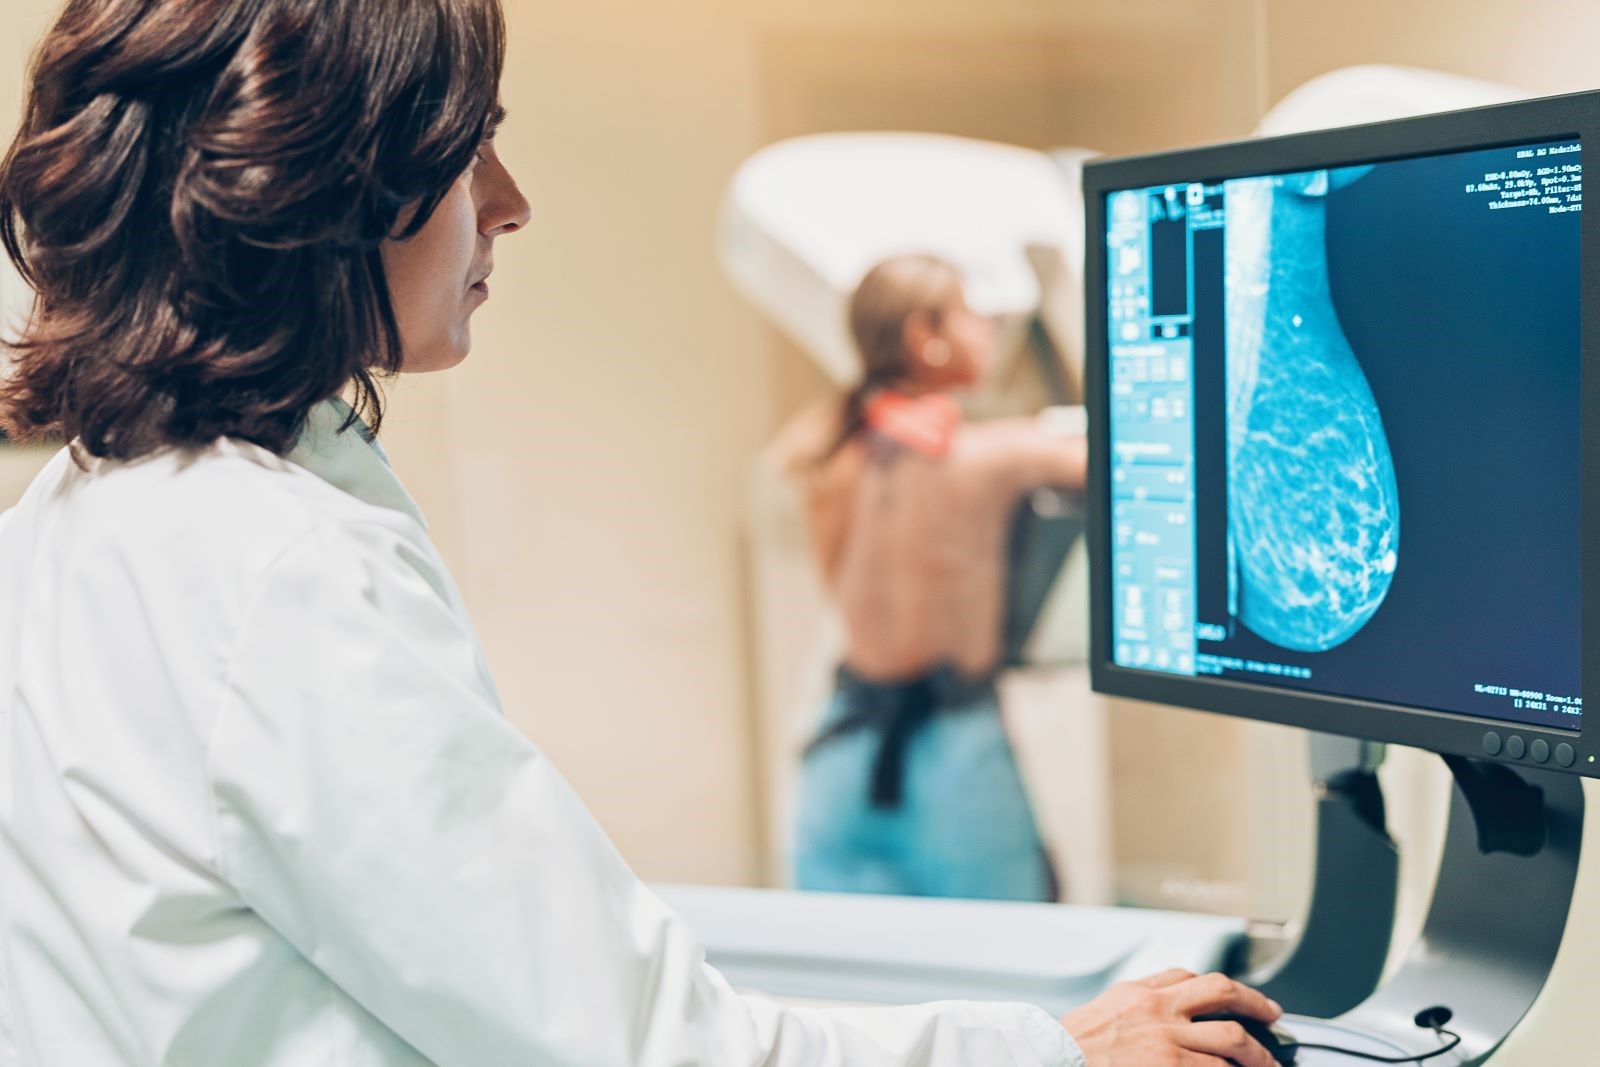 How an Annual Mammogram May Have Saved a Seemingly Healthy Woman's Life